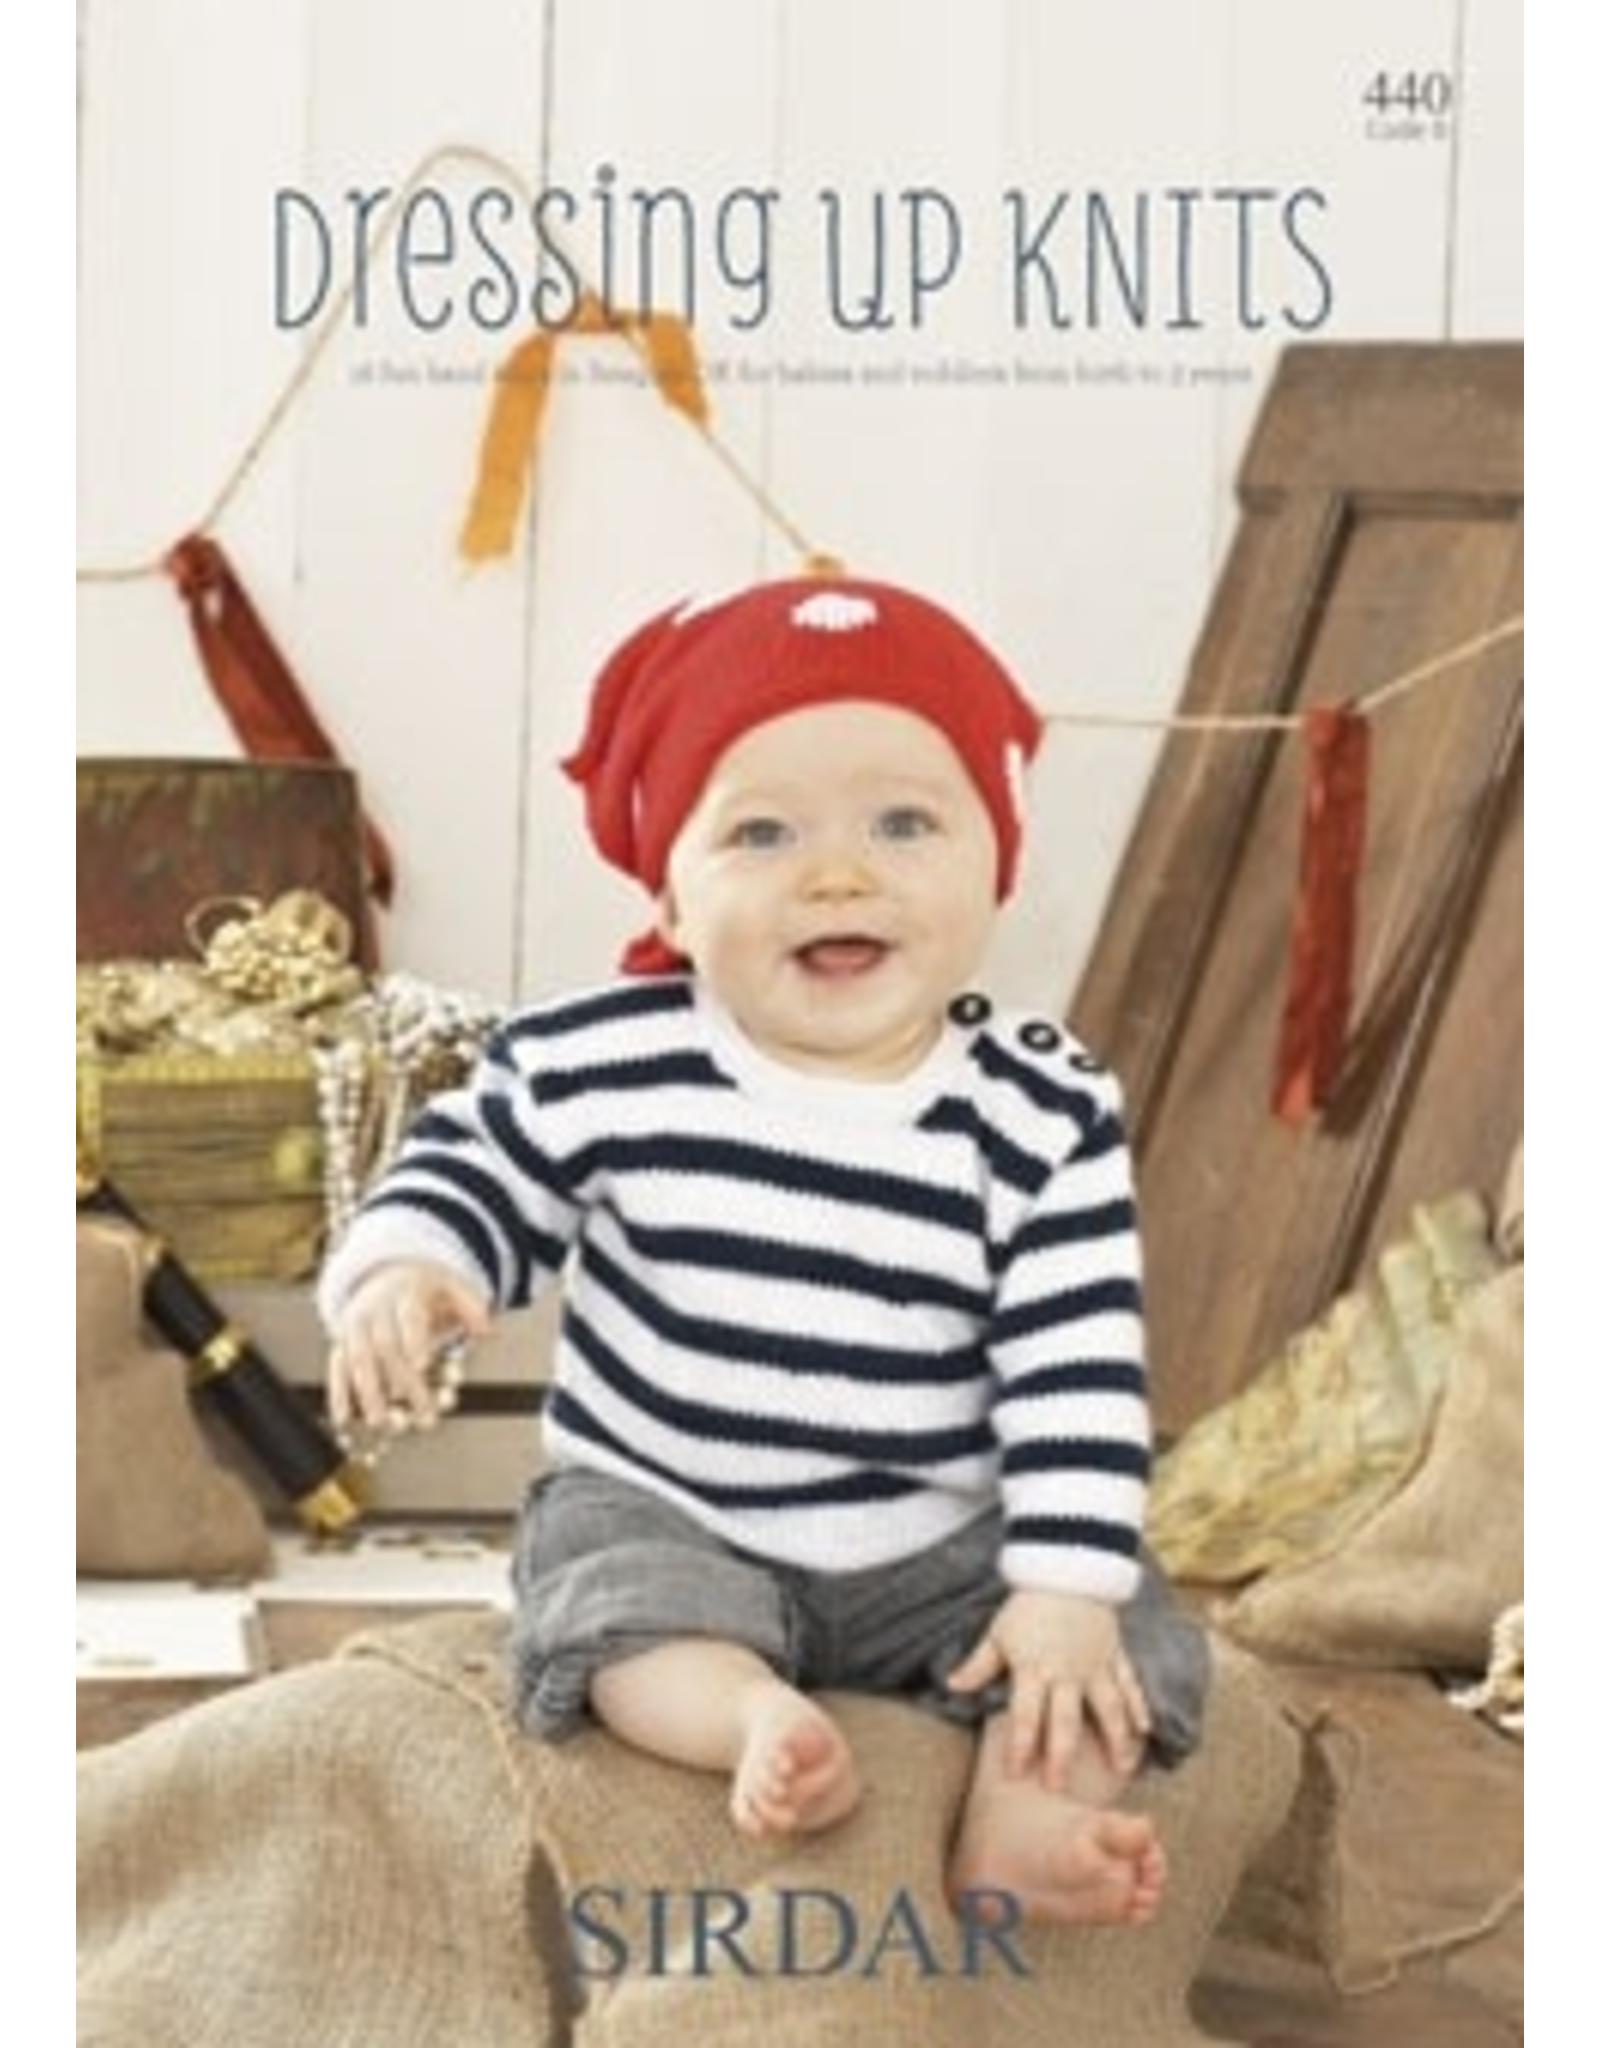 Dressing Up Knits